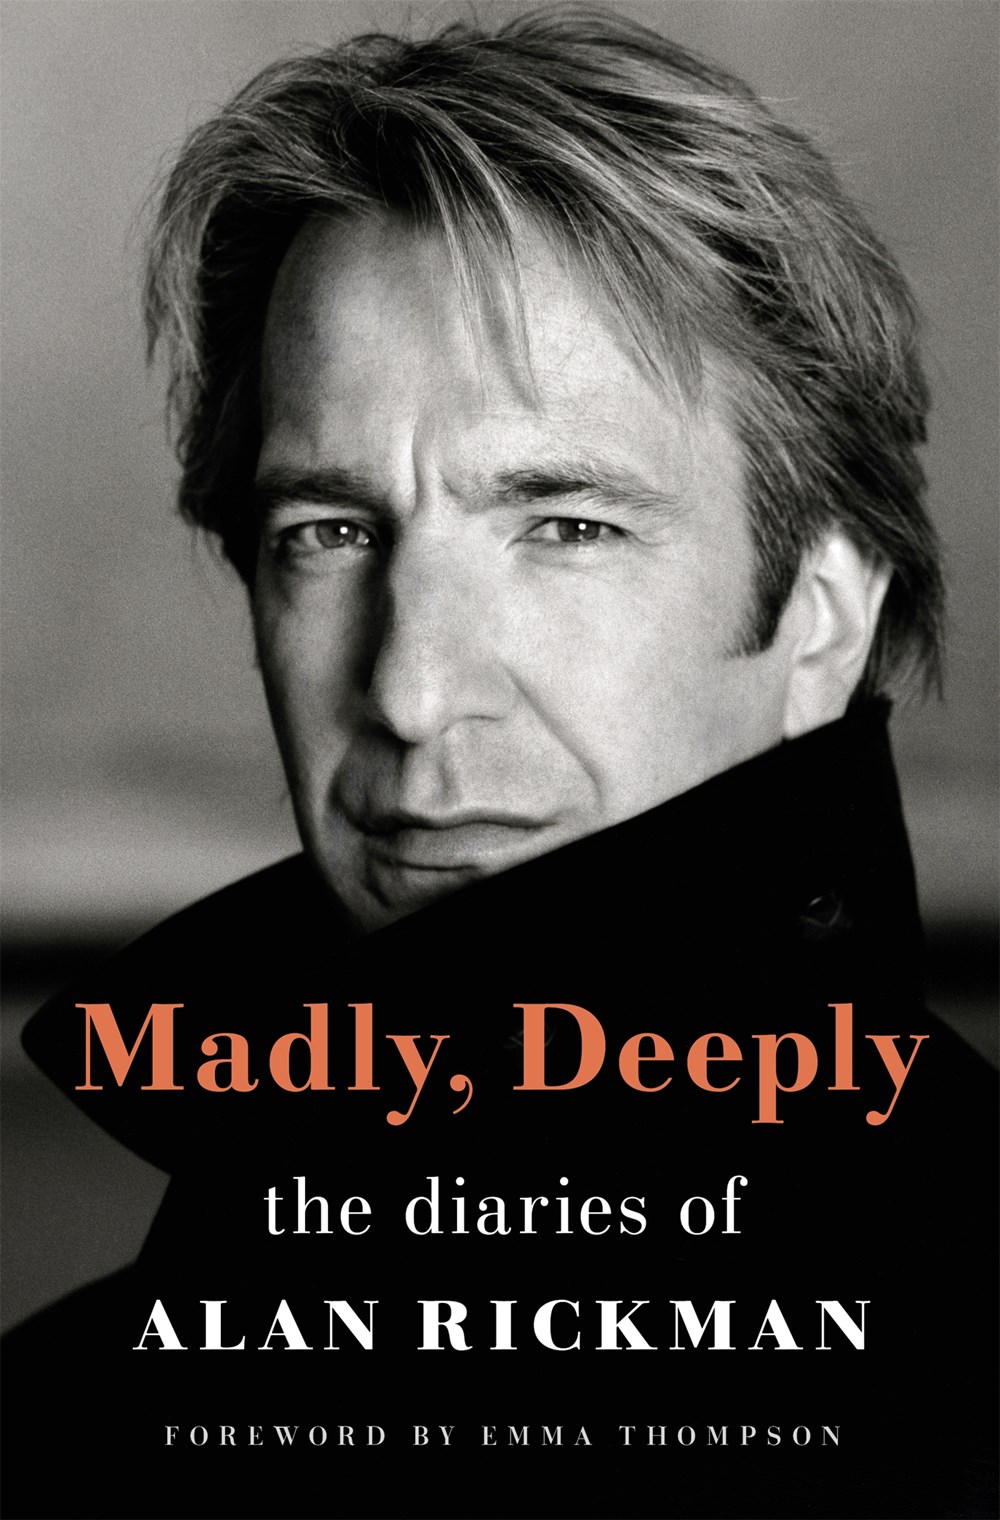 Image of "Madly, Deeply: The Diaries of Alan Rickman"